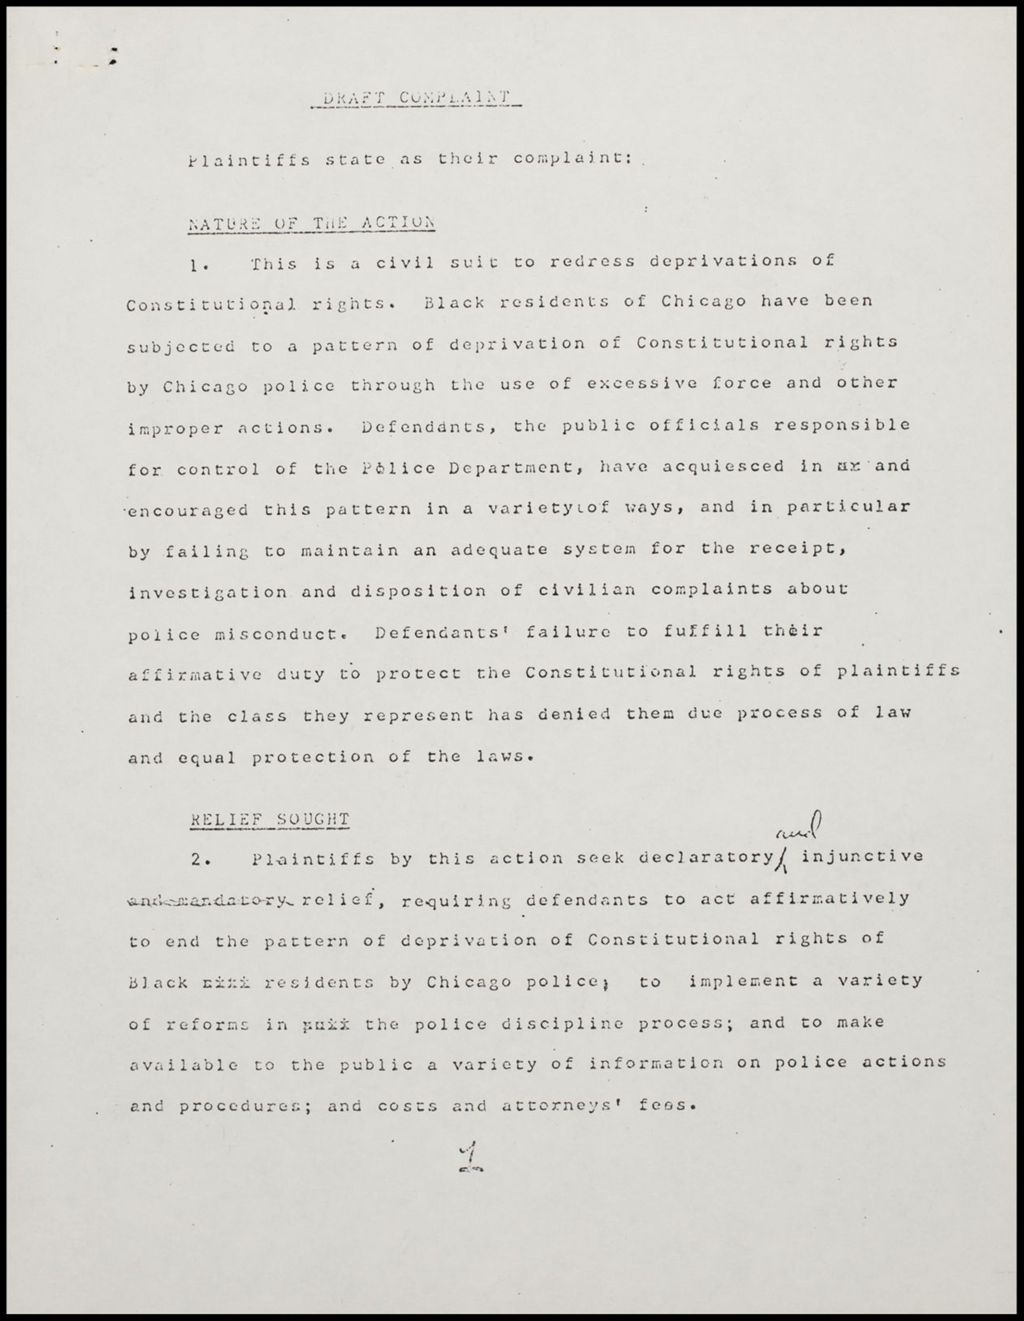 Miniature of Race relations and Law Enforcement Draft Complaint, undated (Folder III-1964)